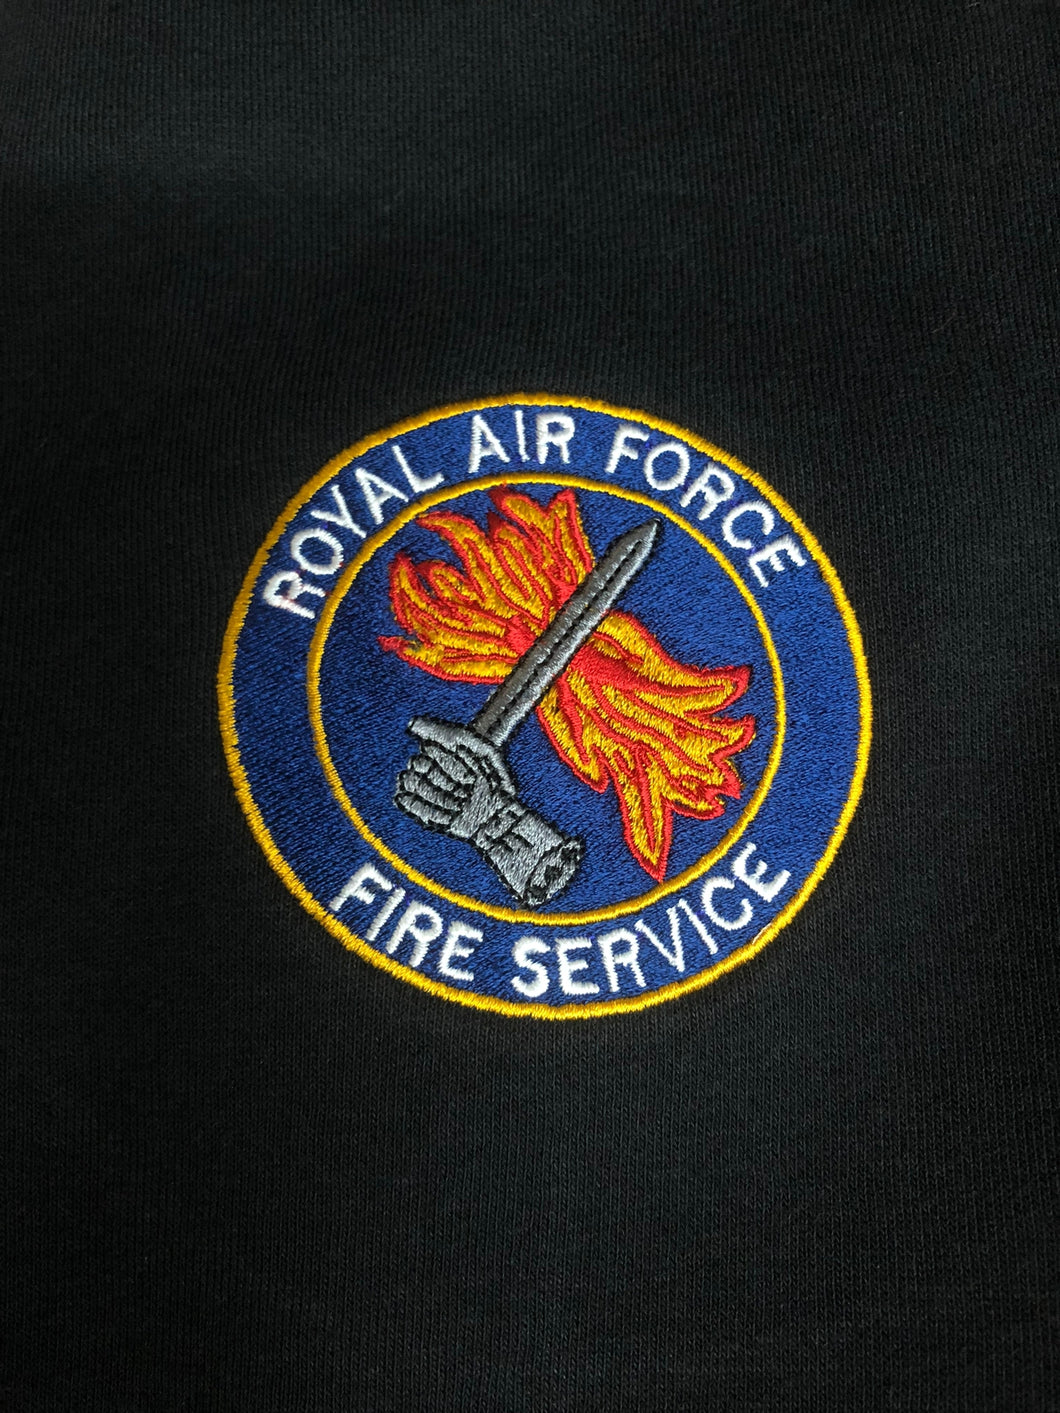 RAF Royal Air Force Fire Service - Embroidered Design - Choose your Garment